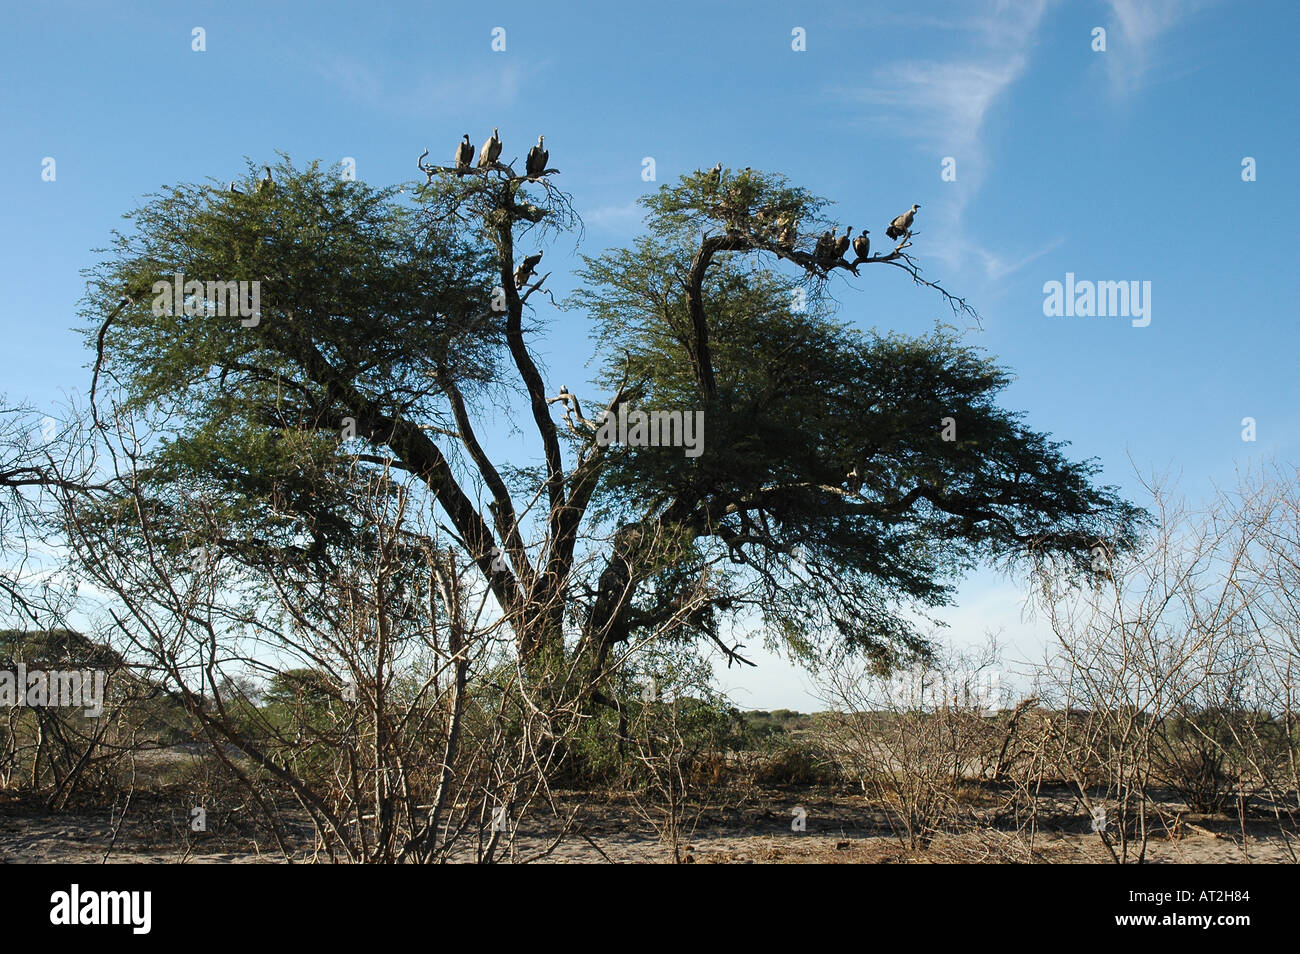 Tree full of vultures in midday heat near Meno a Kweno in Botswana southern Africa Stock Photo